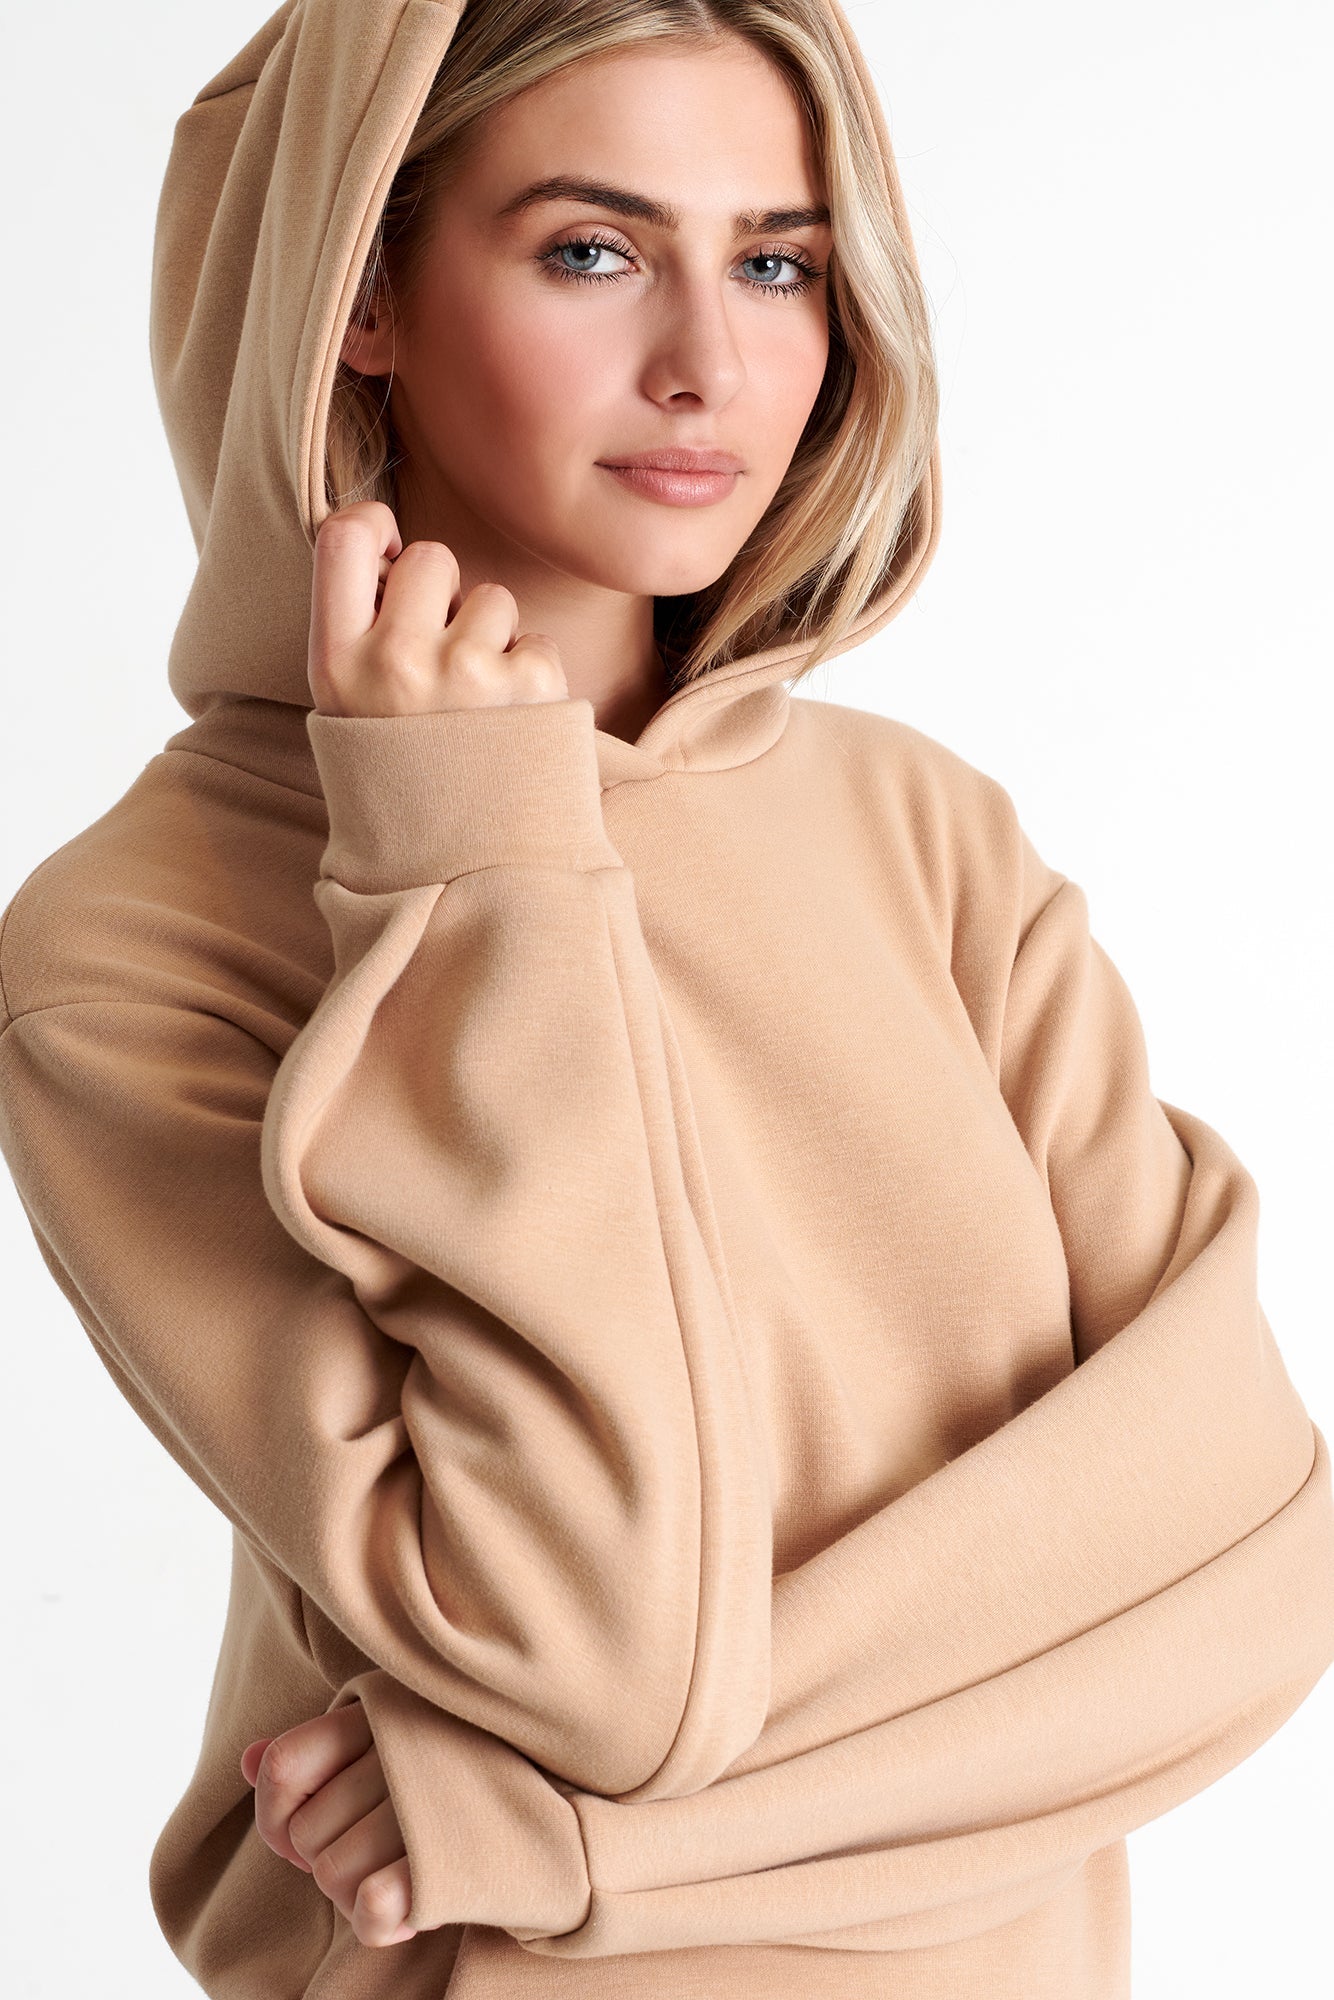 52179-81-170 - Puff Sleeve Hoodie 02 / 170 Tan / 64% POLYESTER 32% COTTON 4% POLYURE